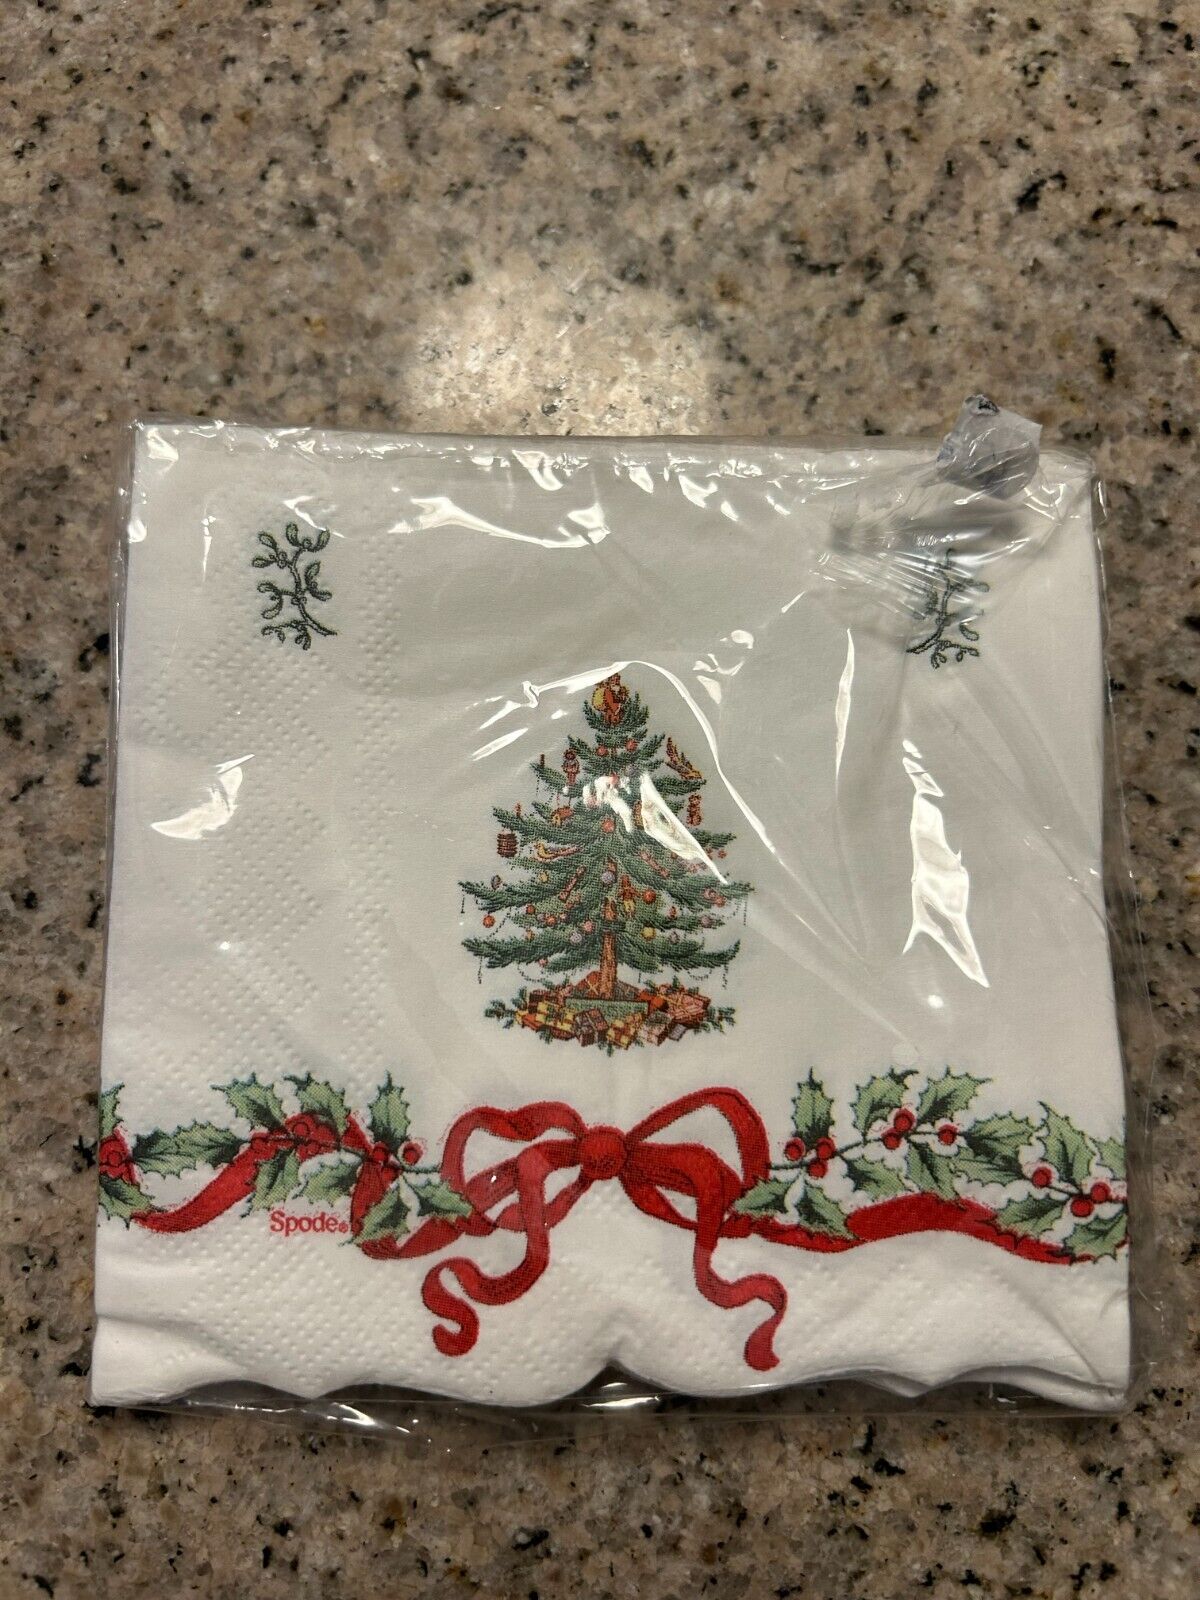 Spode Christmas Tree  Paper Beverage Napkins  Set of 20 3-Ply  C R Gibson